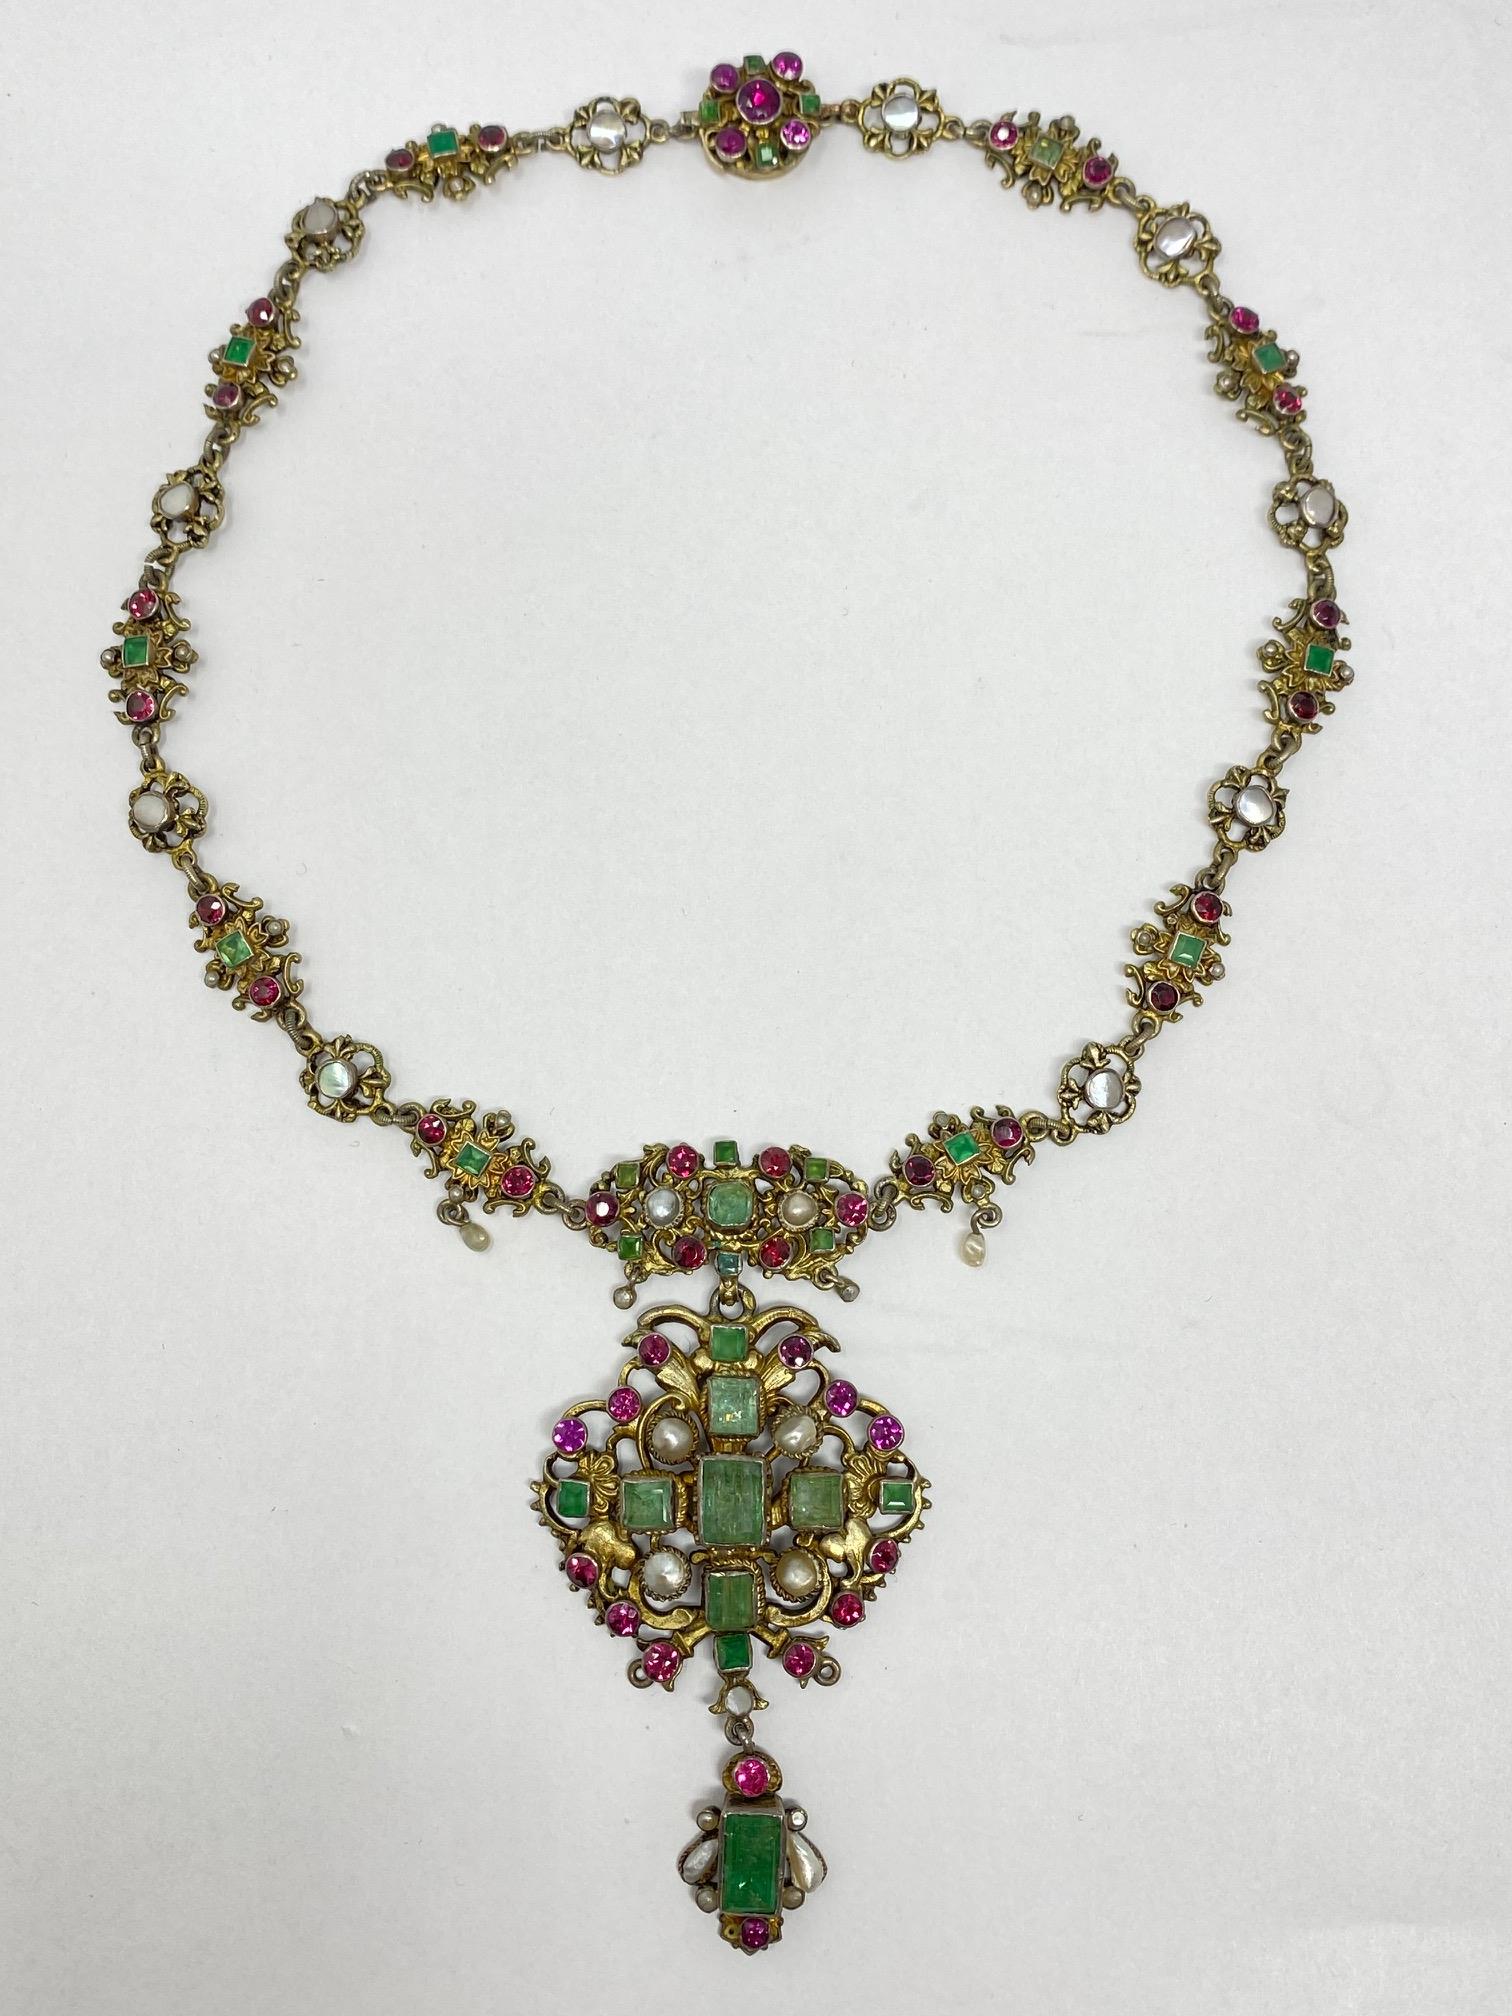 □ AUSTRO-HUNGARIAN SILVER-GILT AND GEM-SET NECKLACE, 1890s - Image 2 of 4